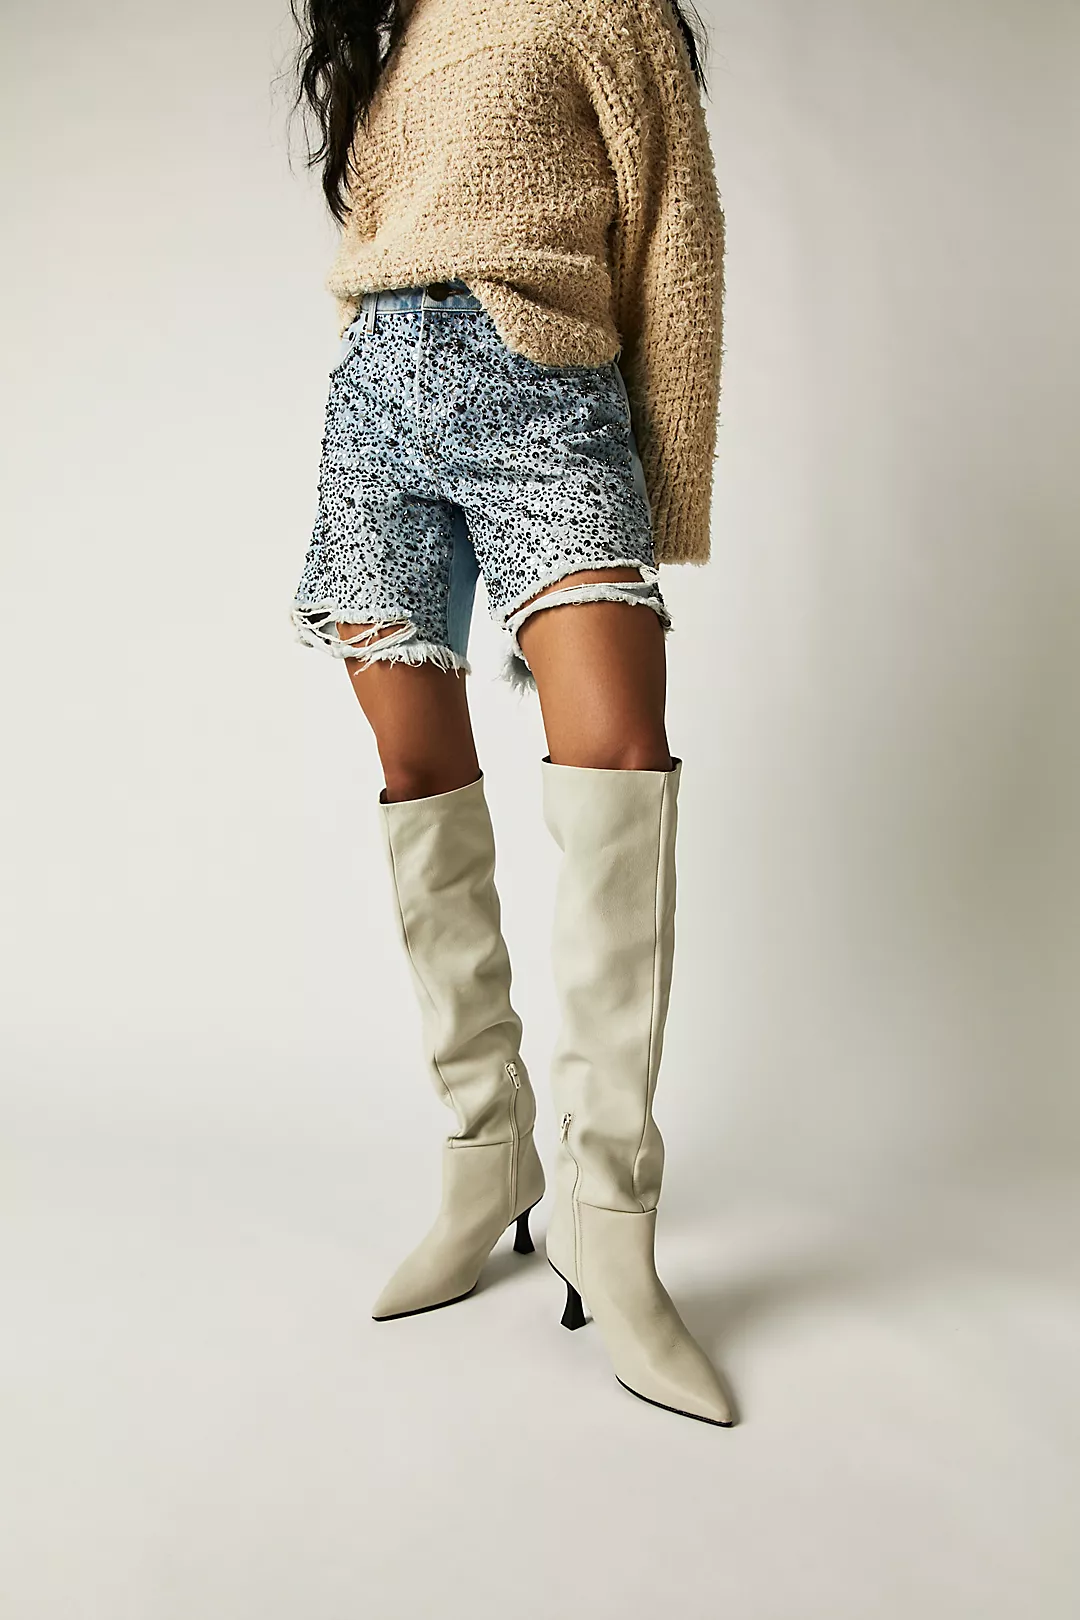 Modernly chic, these Free People tall cream leather boots are featured in a slouchy style and minimalist design with a skinny flared heel for slight boost.